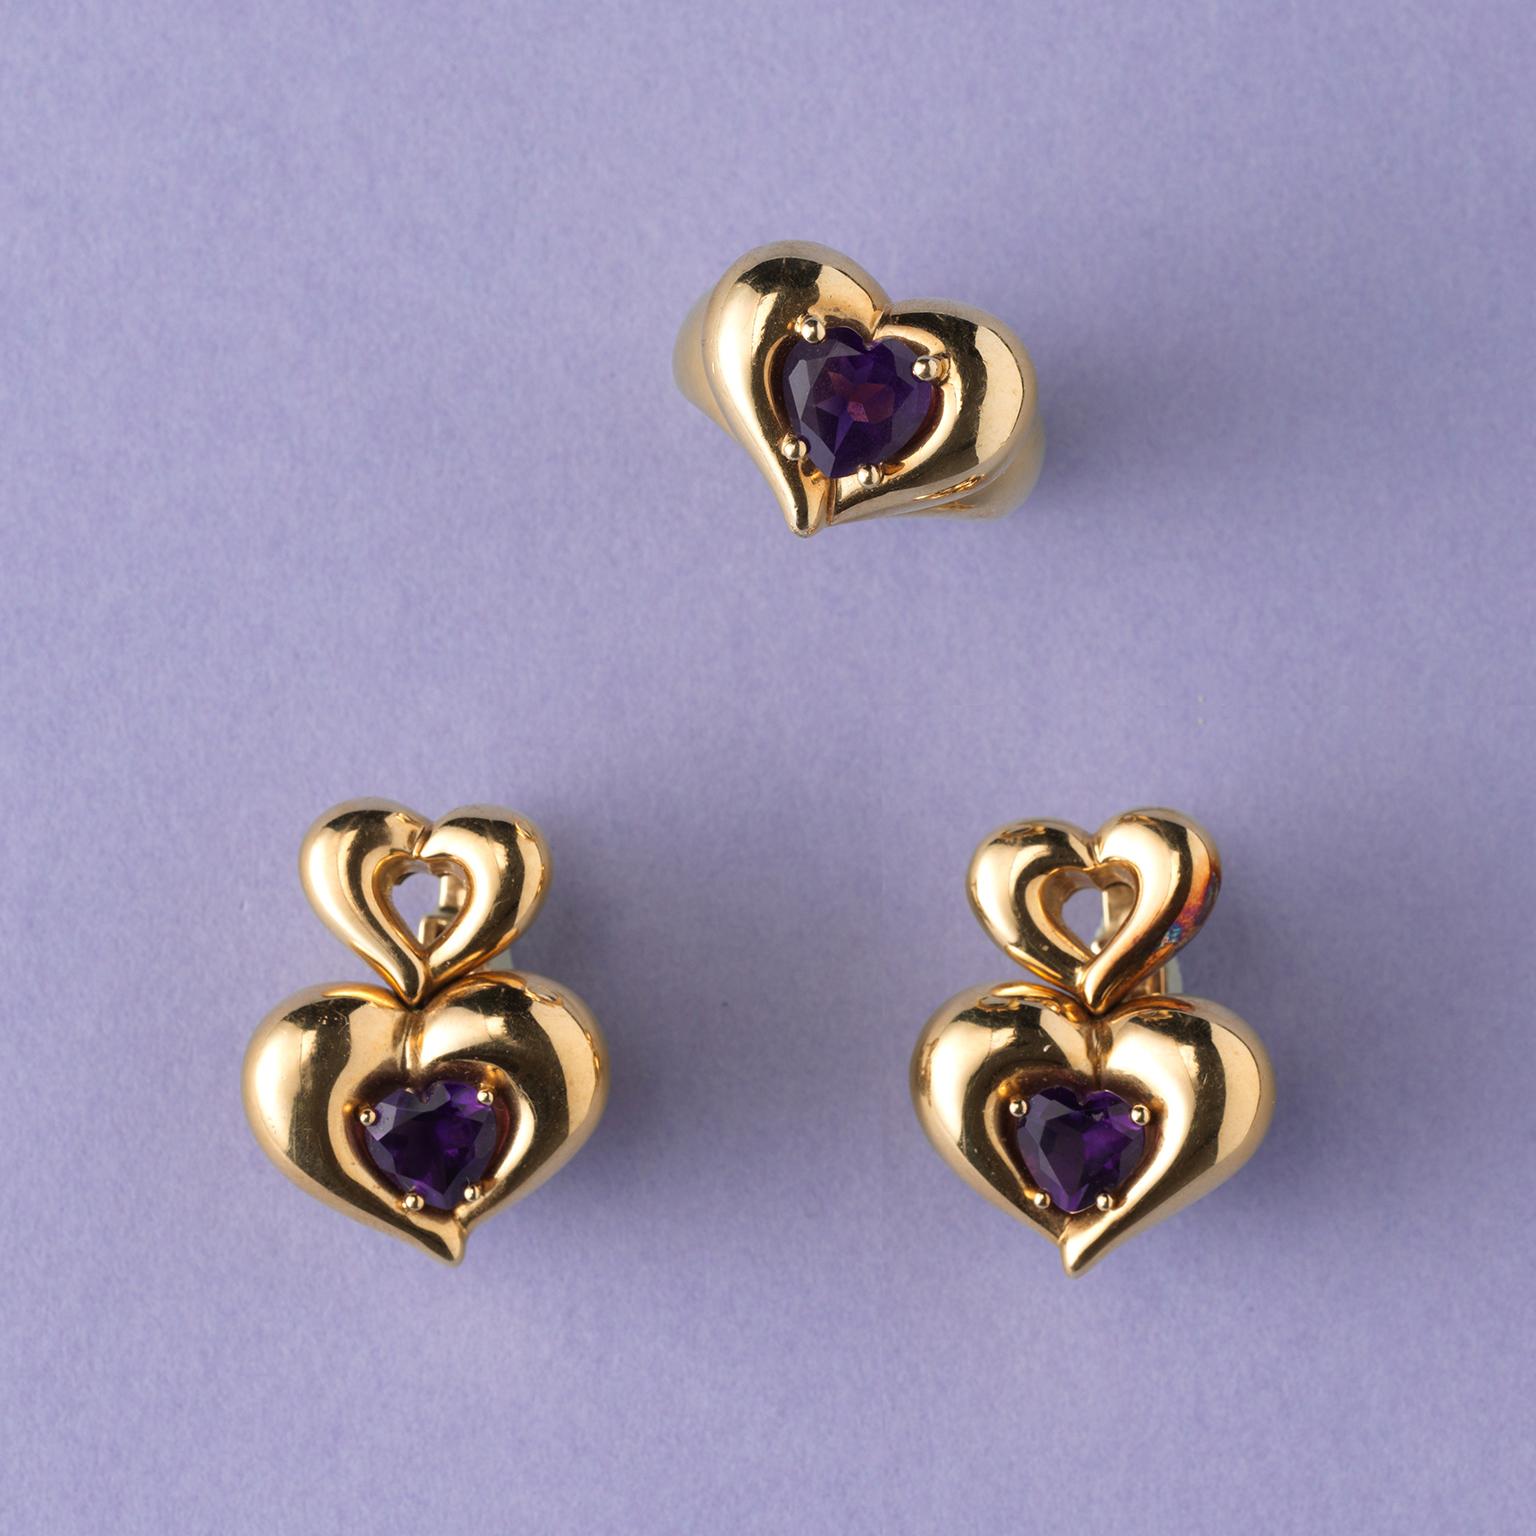 A set consisting of an 18 carat gold heart shaped ring and earrings each set with heart shaped amethyst, signed and numbered: Van Cleef & Arpels, circa 1990.

number ring: CR05.21AM
number earrings: CR03.06AM15
afmetingen oorbellen: 3 x 2.3